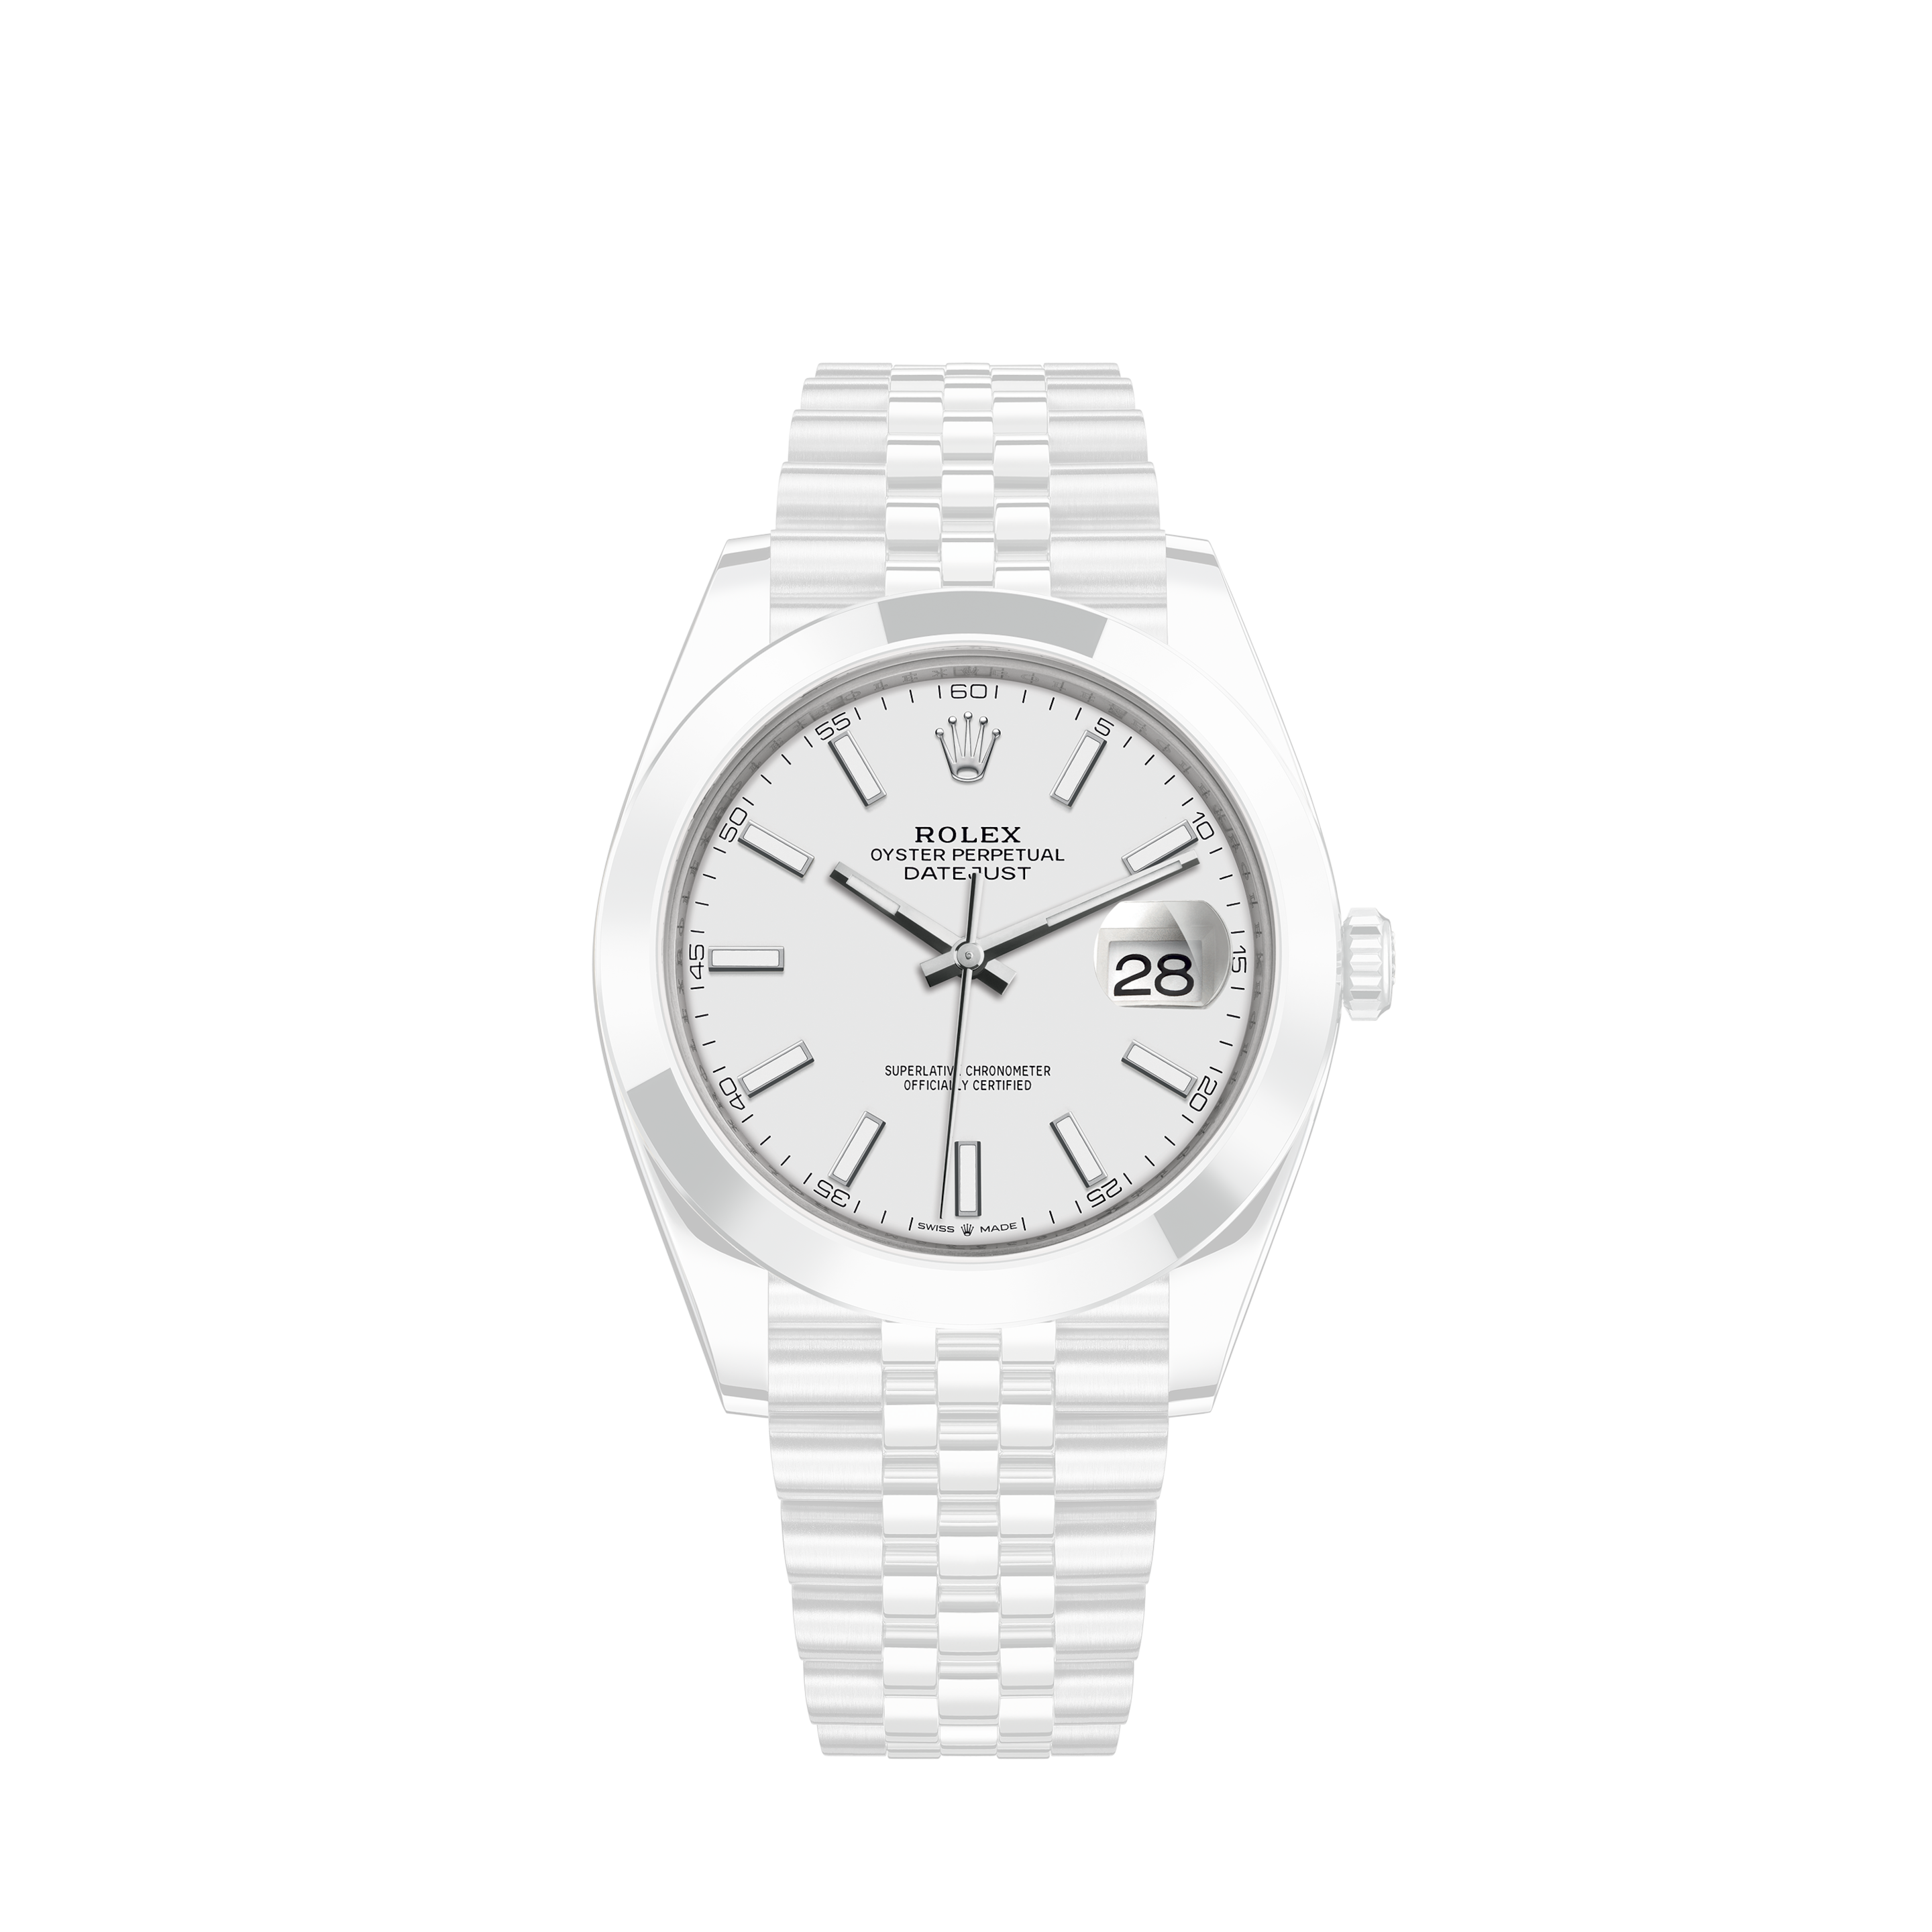 Rolex Datejust 116234 Jubilee Band White Roman Dial & White Gold Fluted BezelRolex Datejust 116234 Men's Watch in 18kt Stainless Steel/White Gold